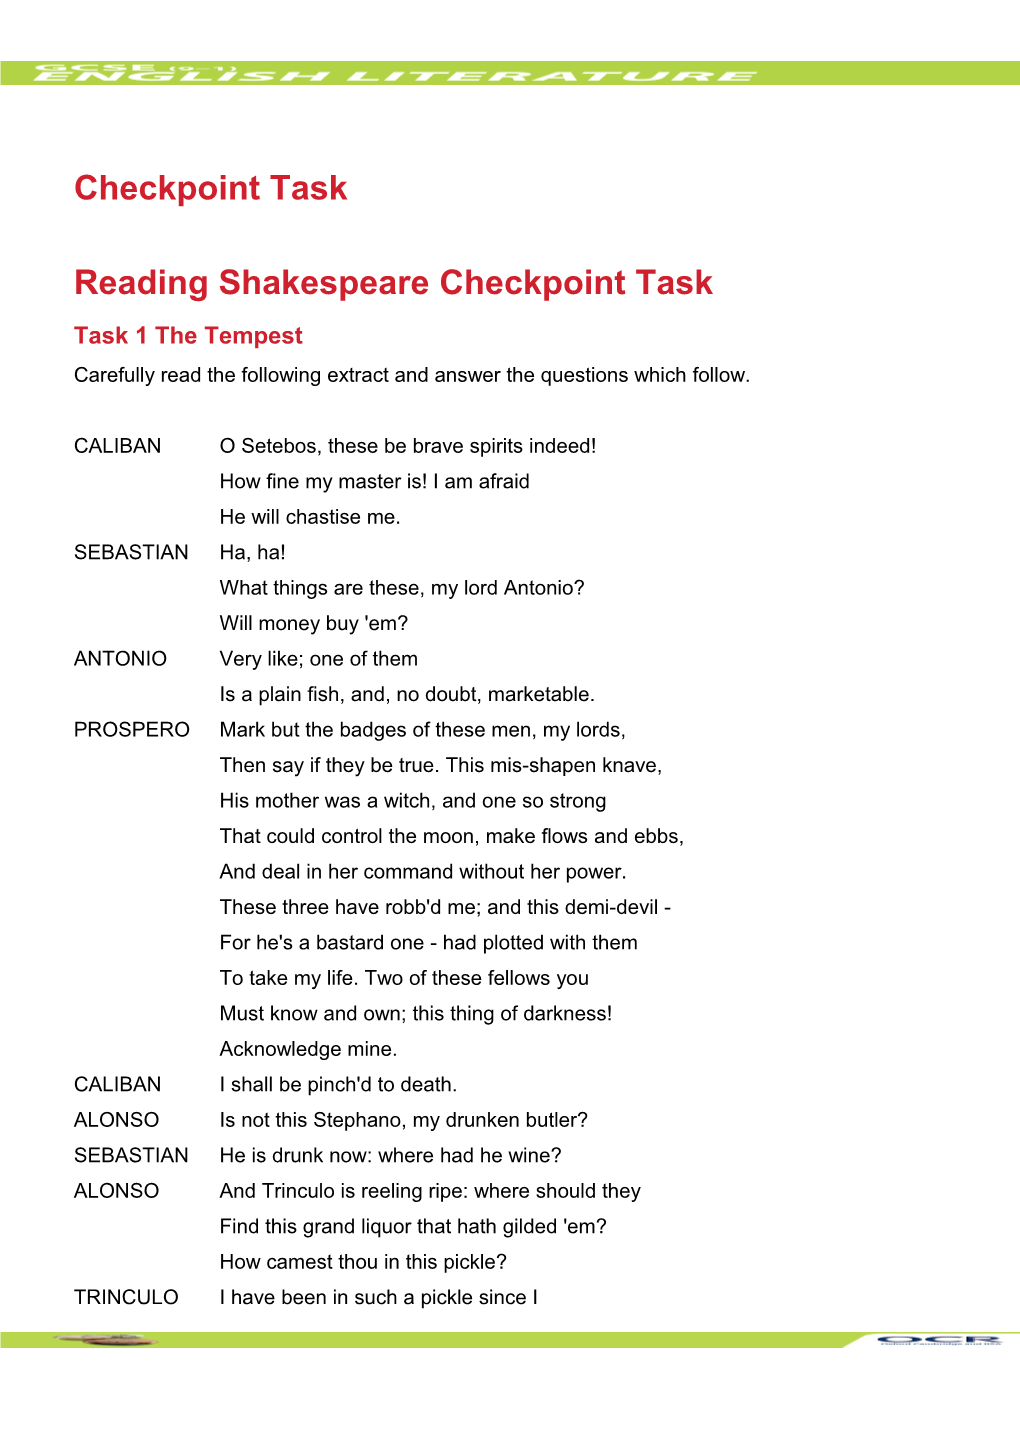 GCSE (9-1) English Literature Checkpoint Task Learner Activity (Reading Shakespeare)